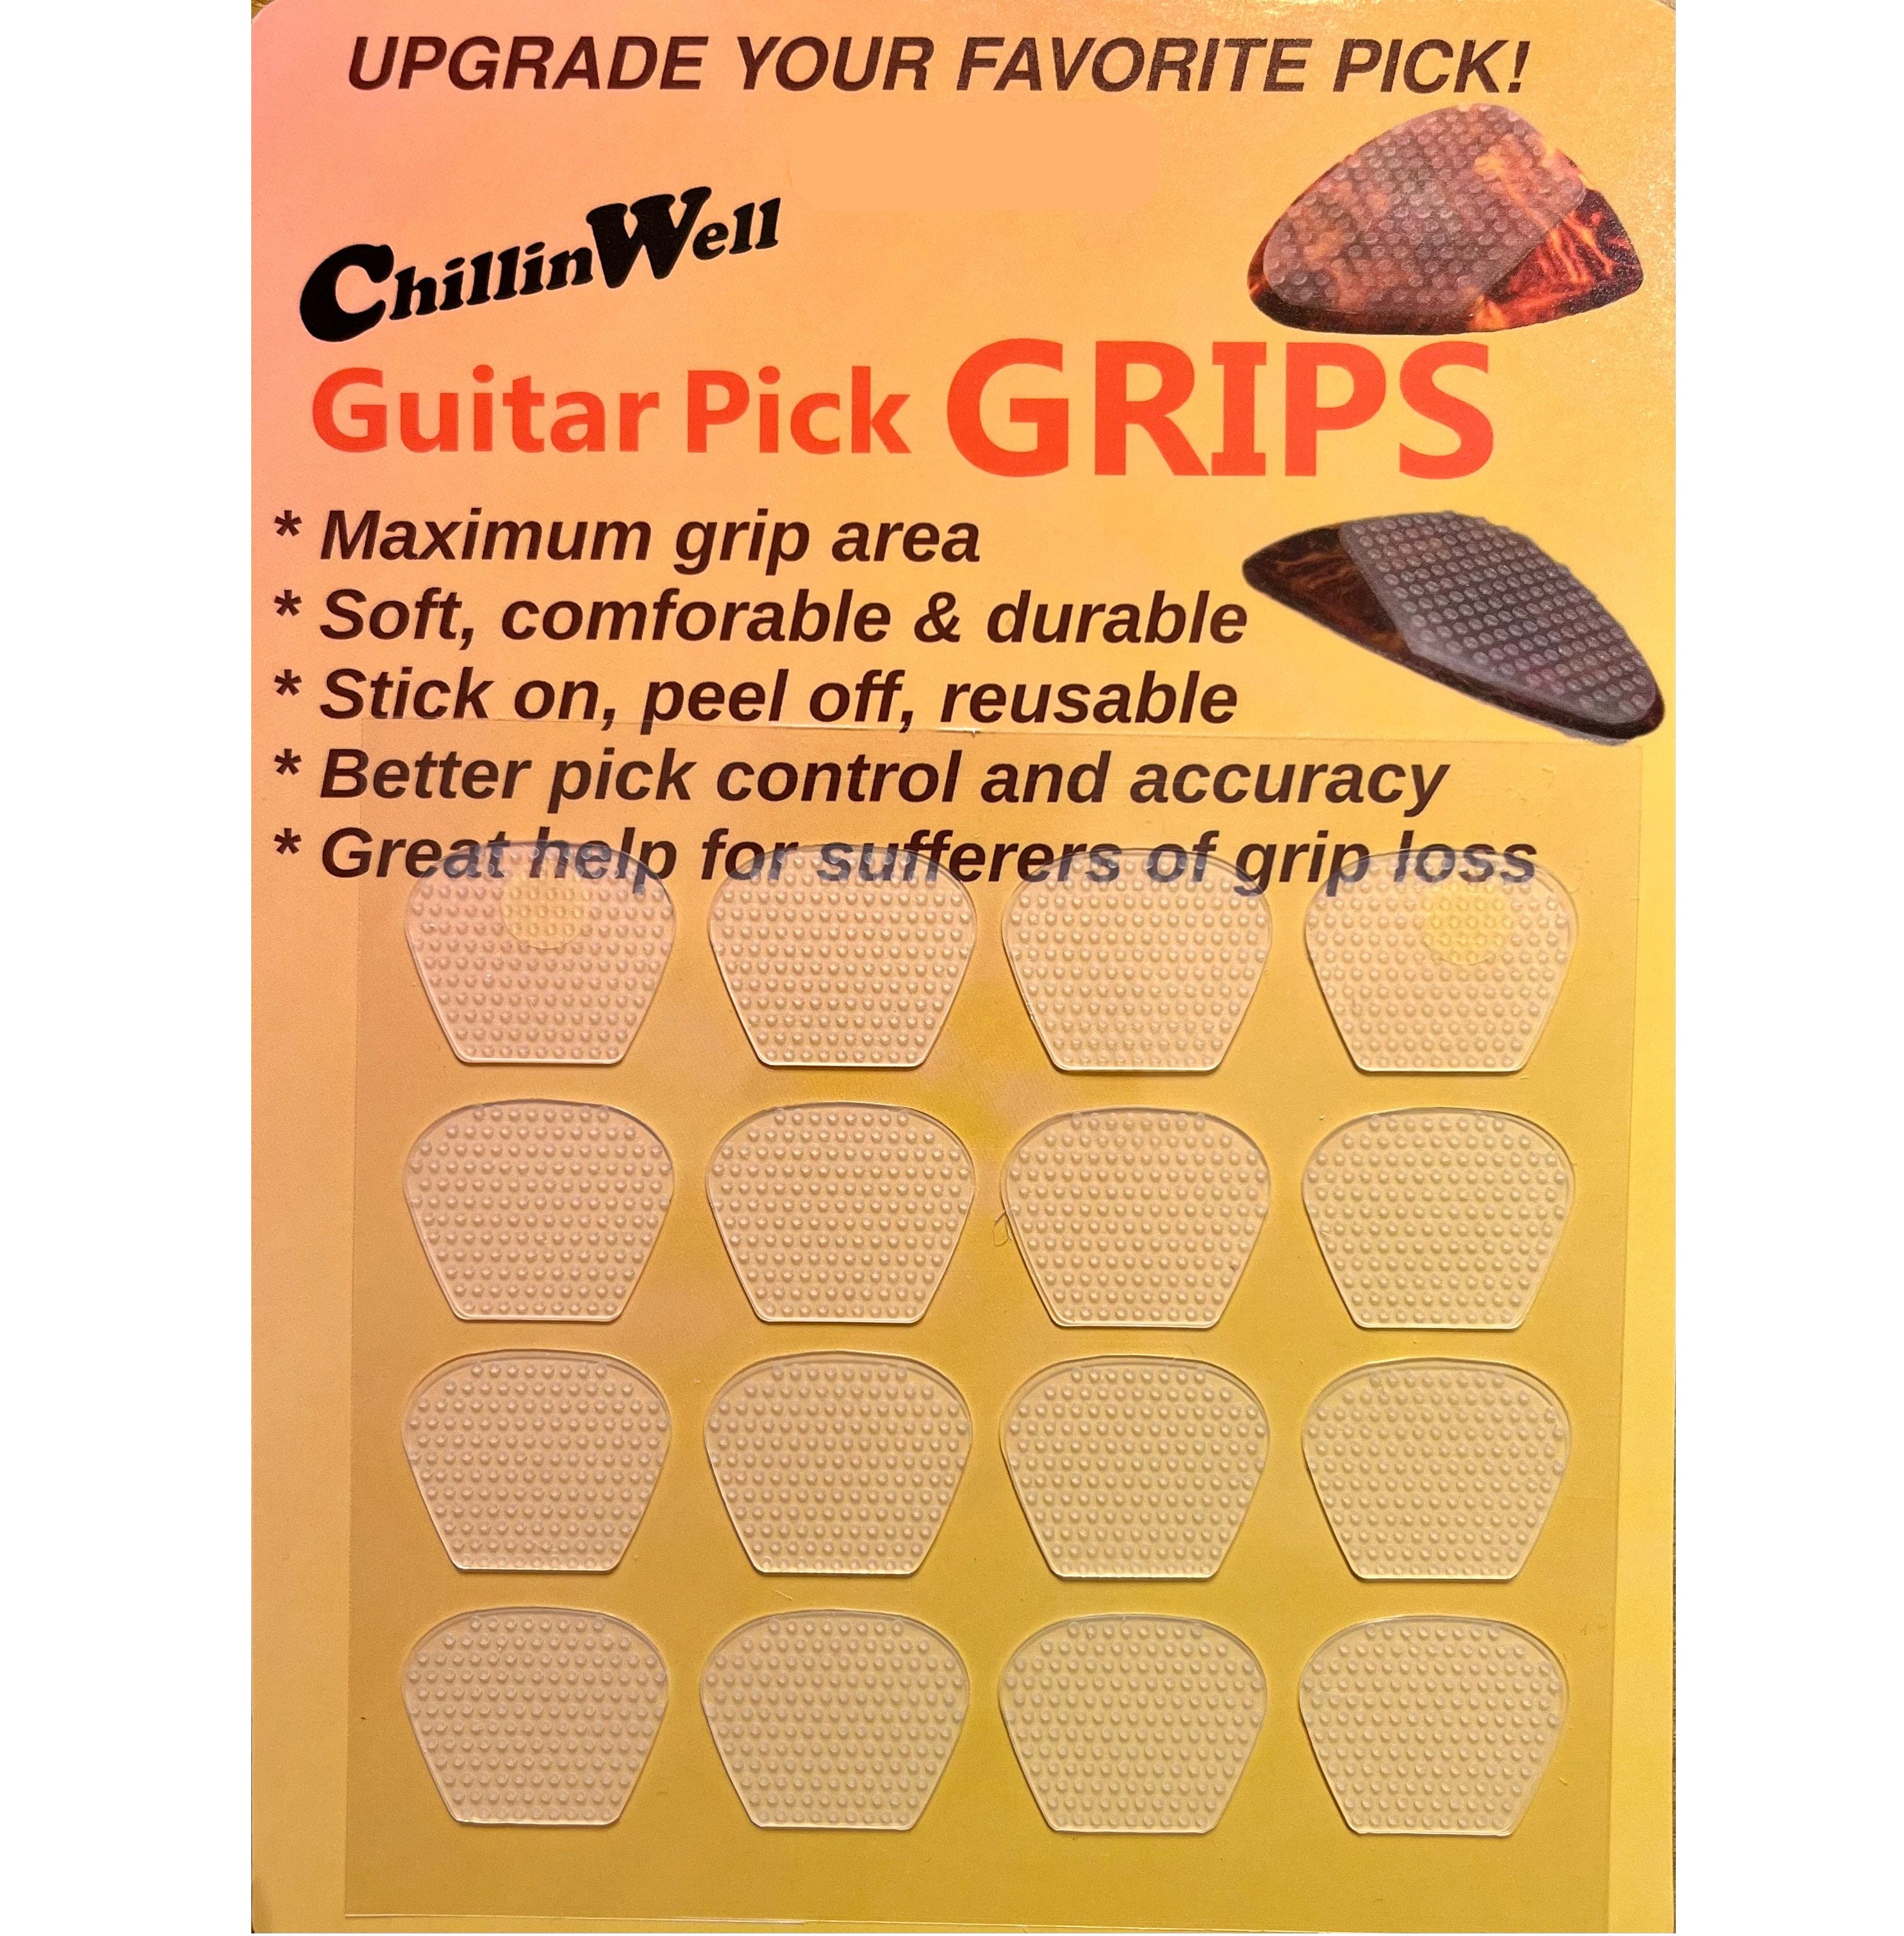 ChillinWell Guitar Pick Grips (16 pc)